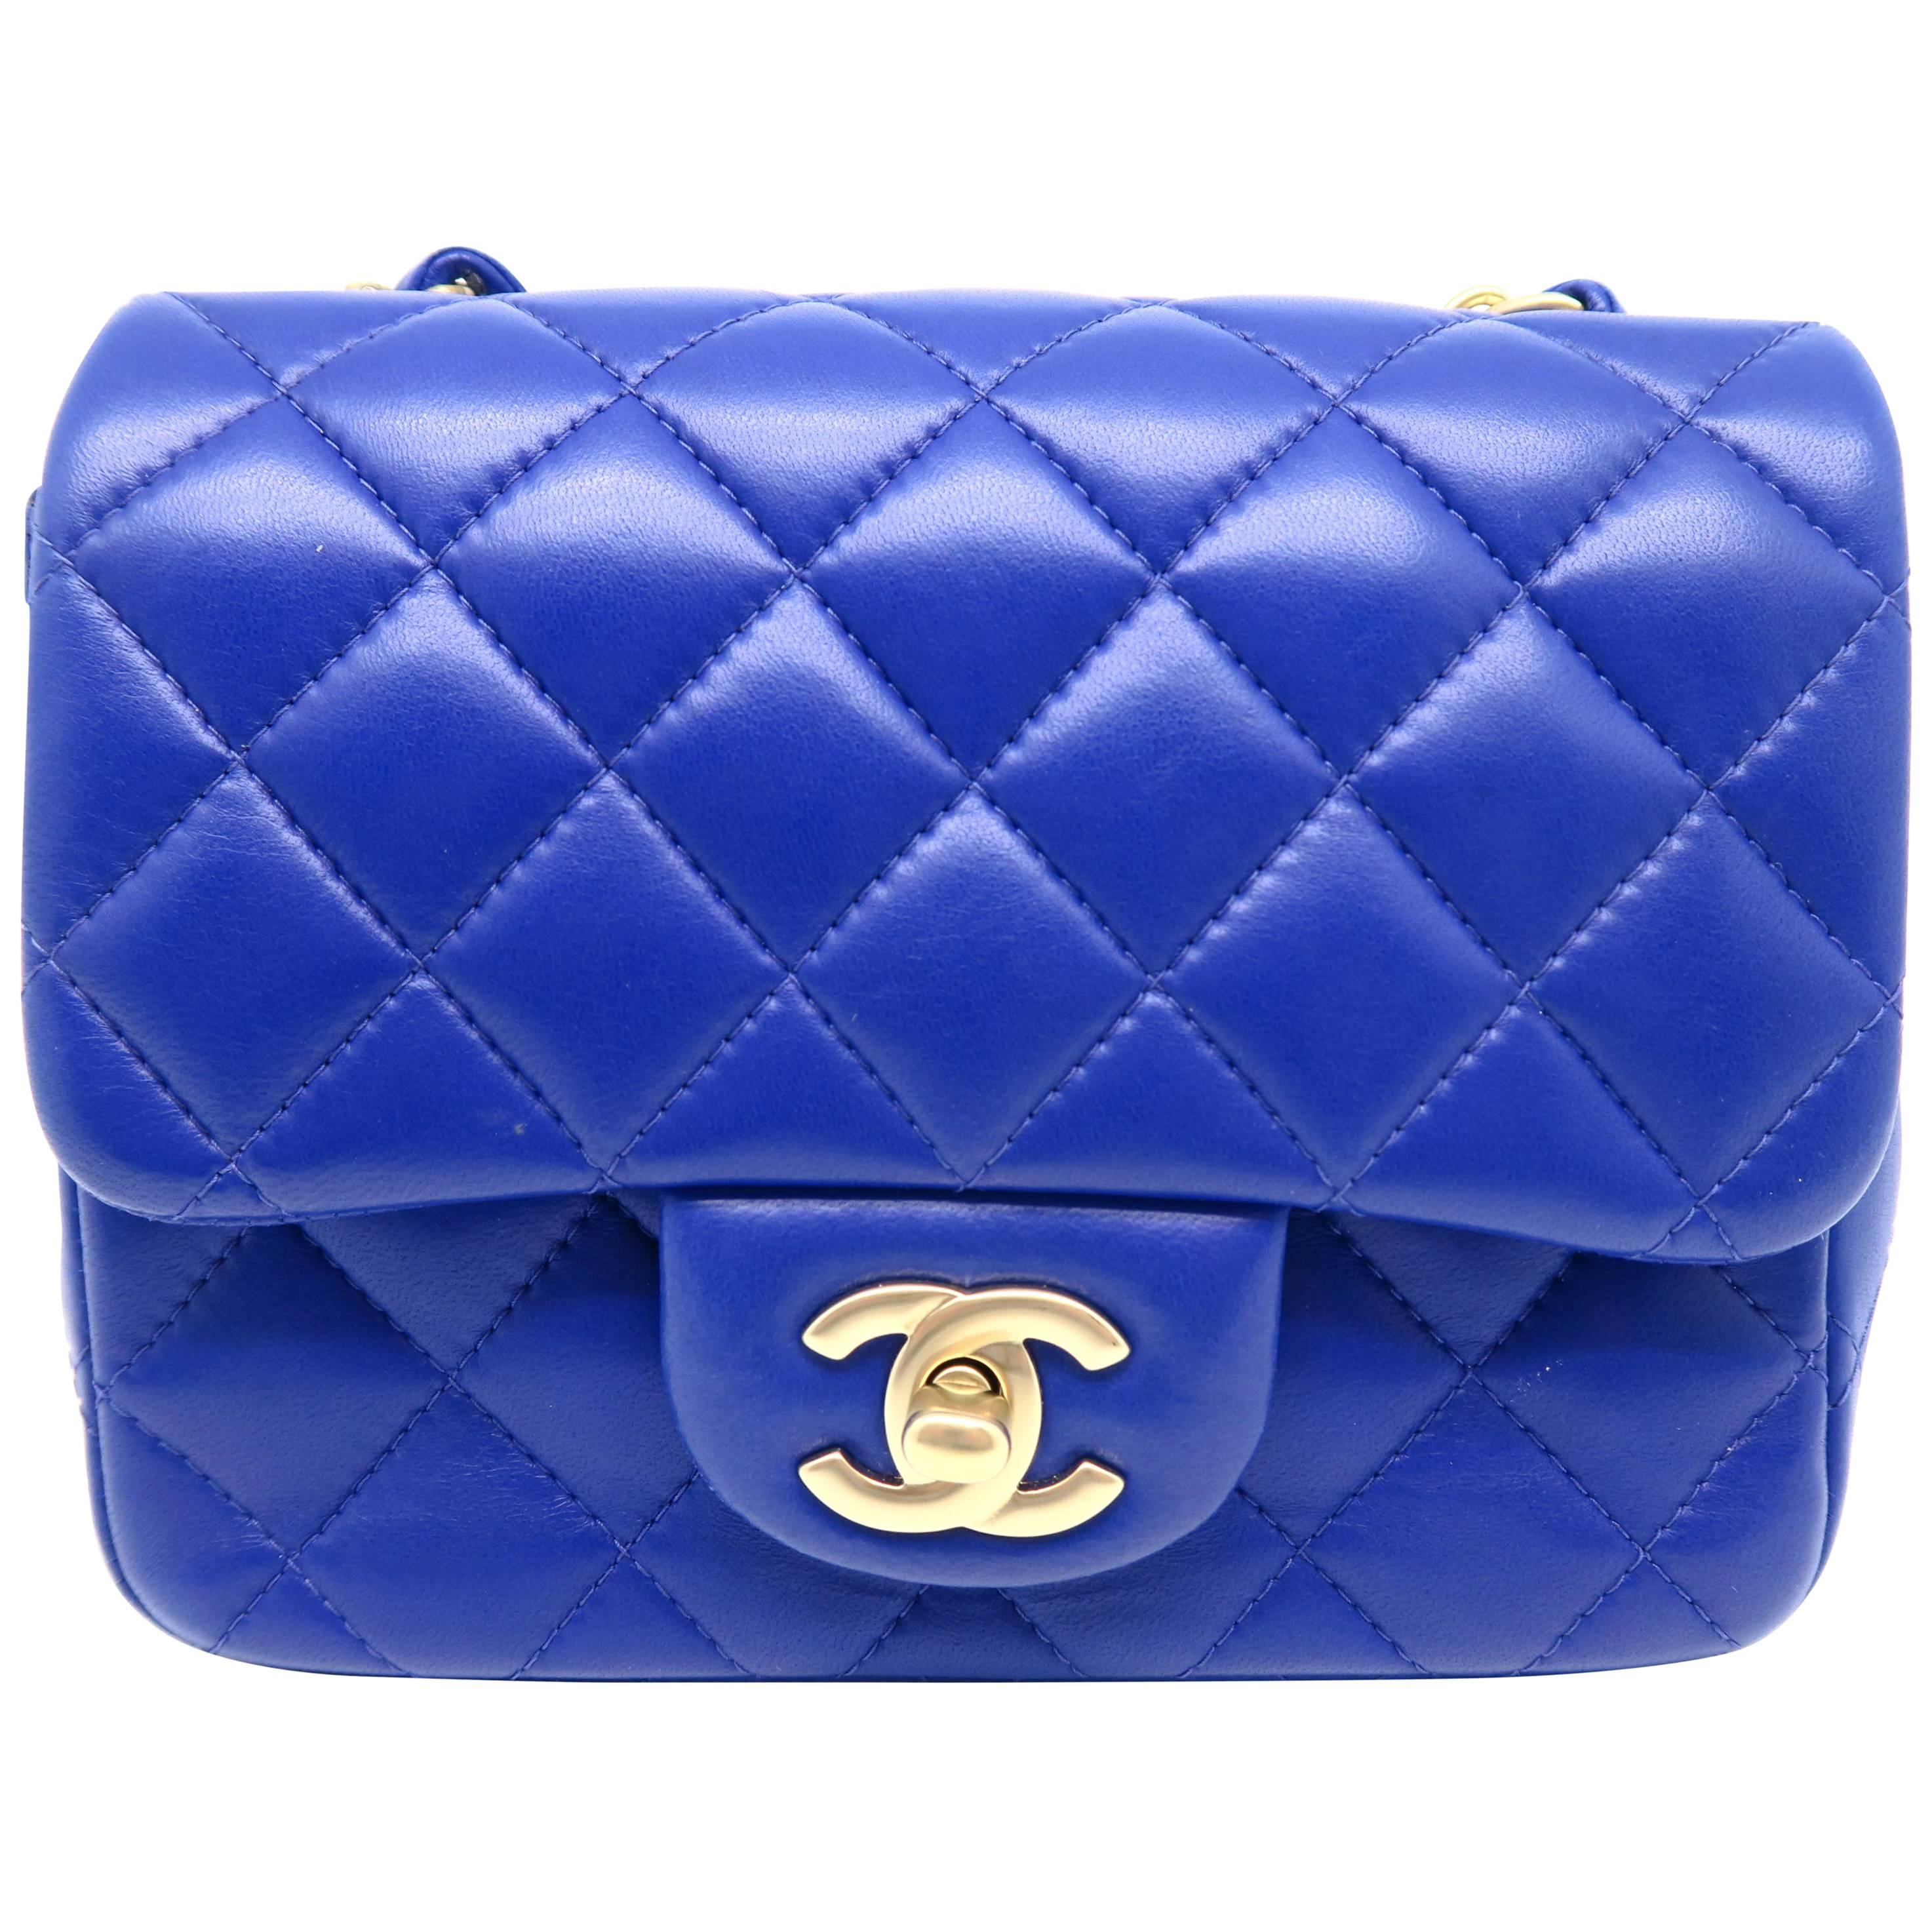 Chanel Mini Classic Flap Blue Quilted Lambskin Leather Chain Shoulder Bag